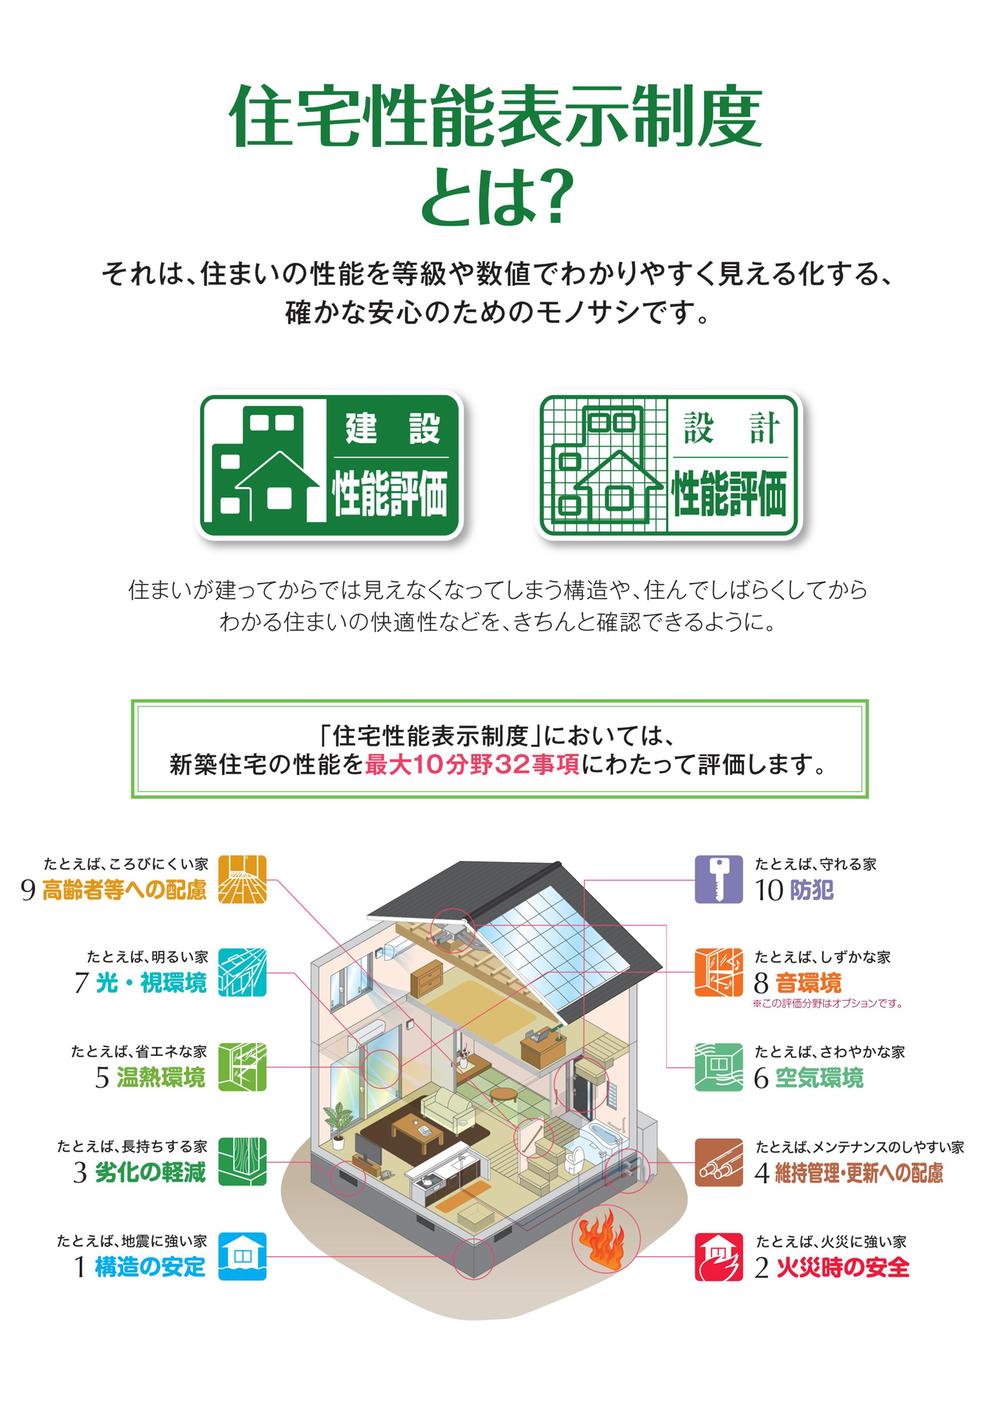 Construction ・ Construction method ・ specification. We will provide a property that has passed through a rigorous inspection by a third party! ! 